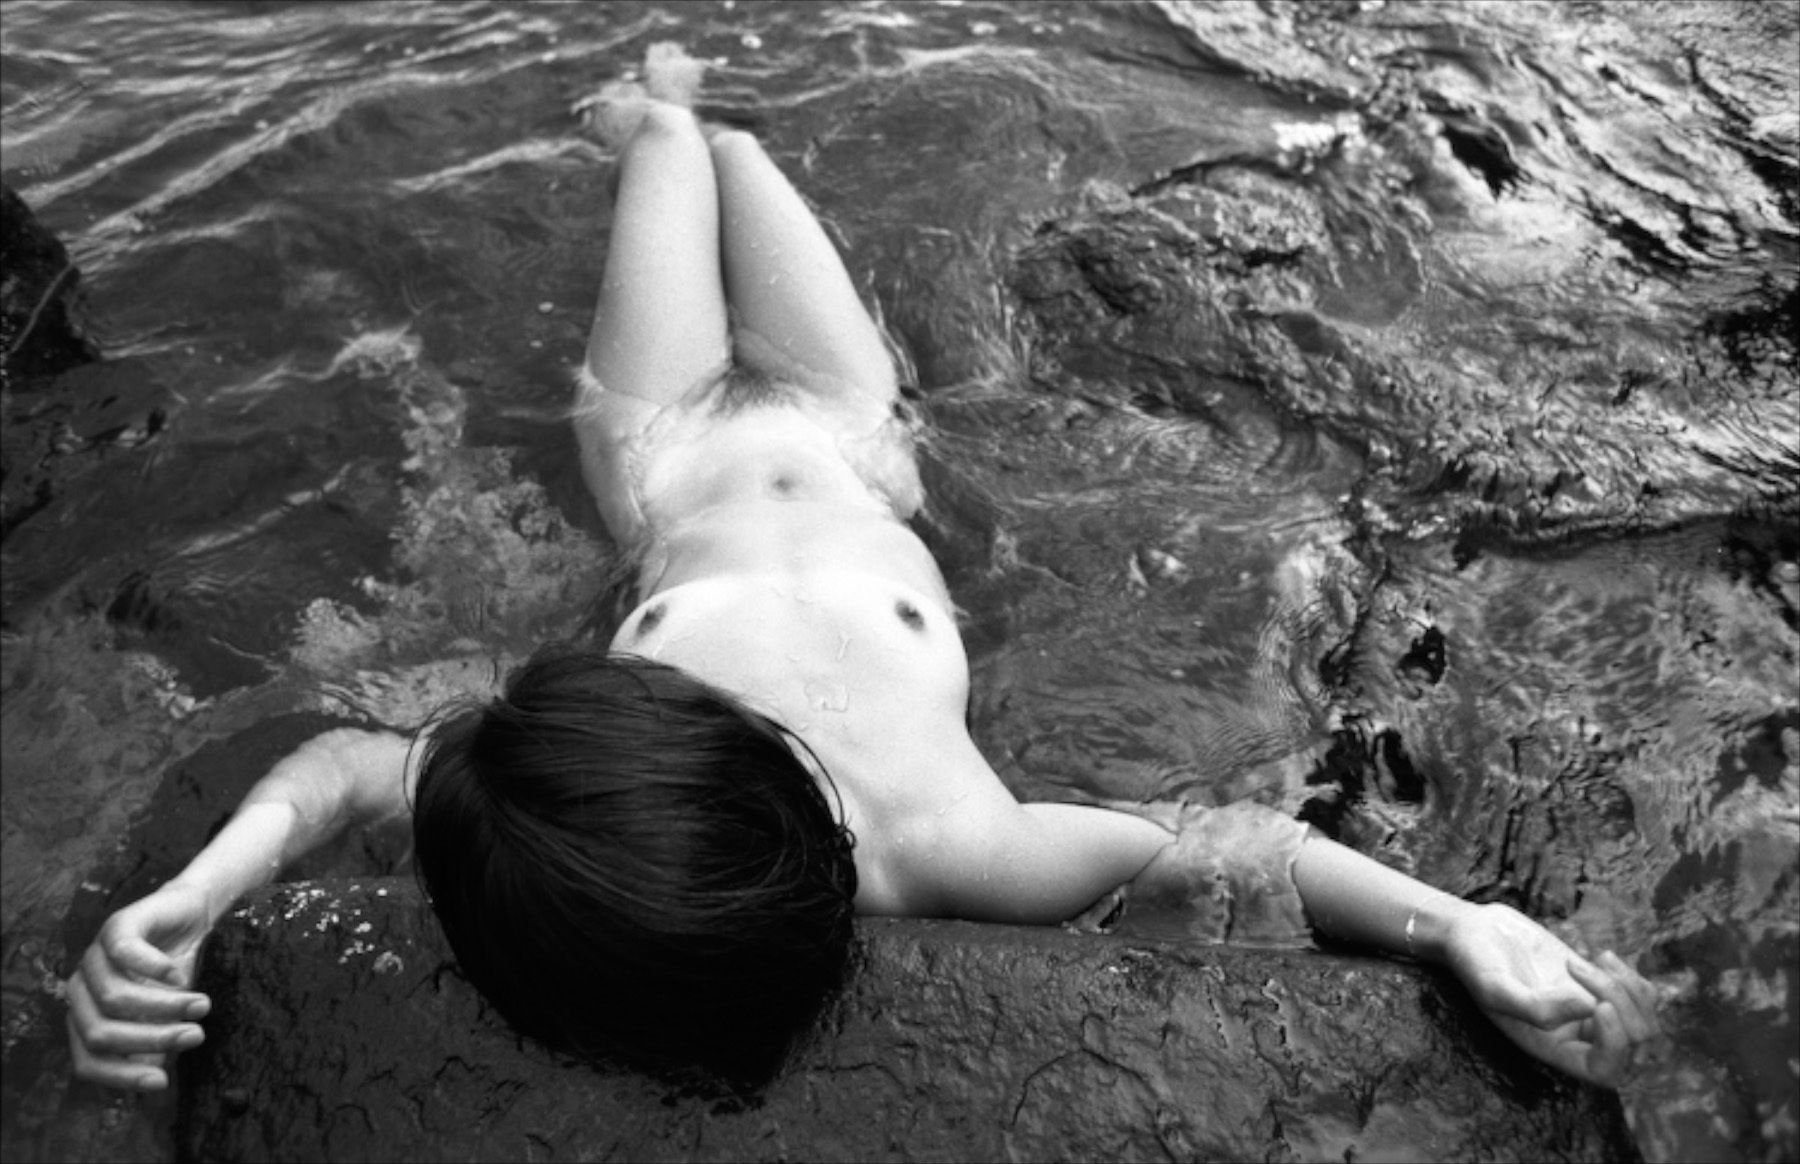 Lying in the water